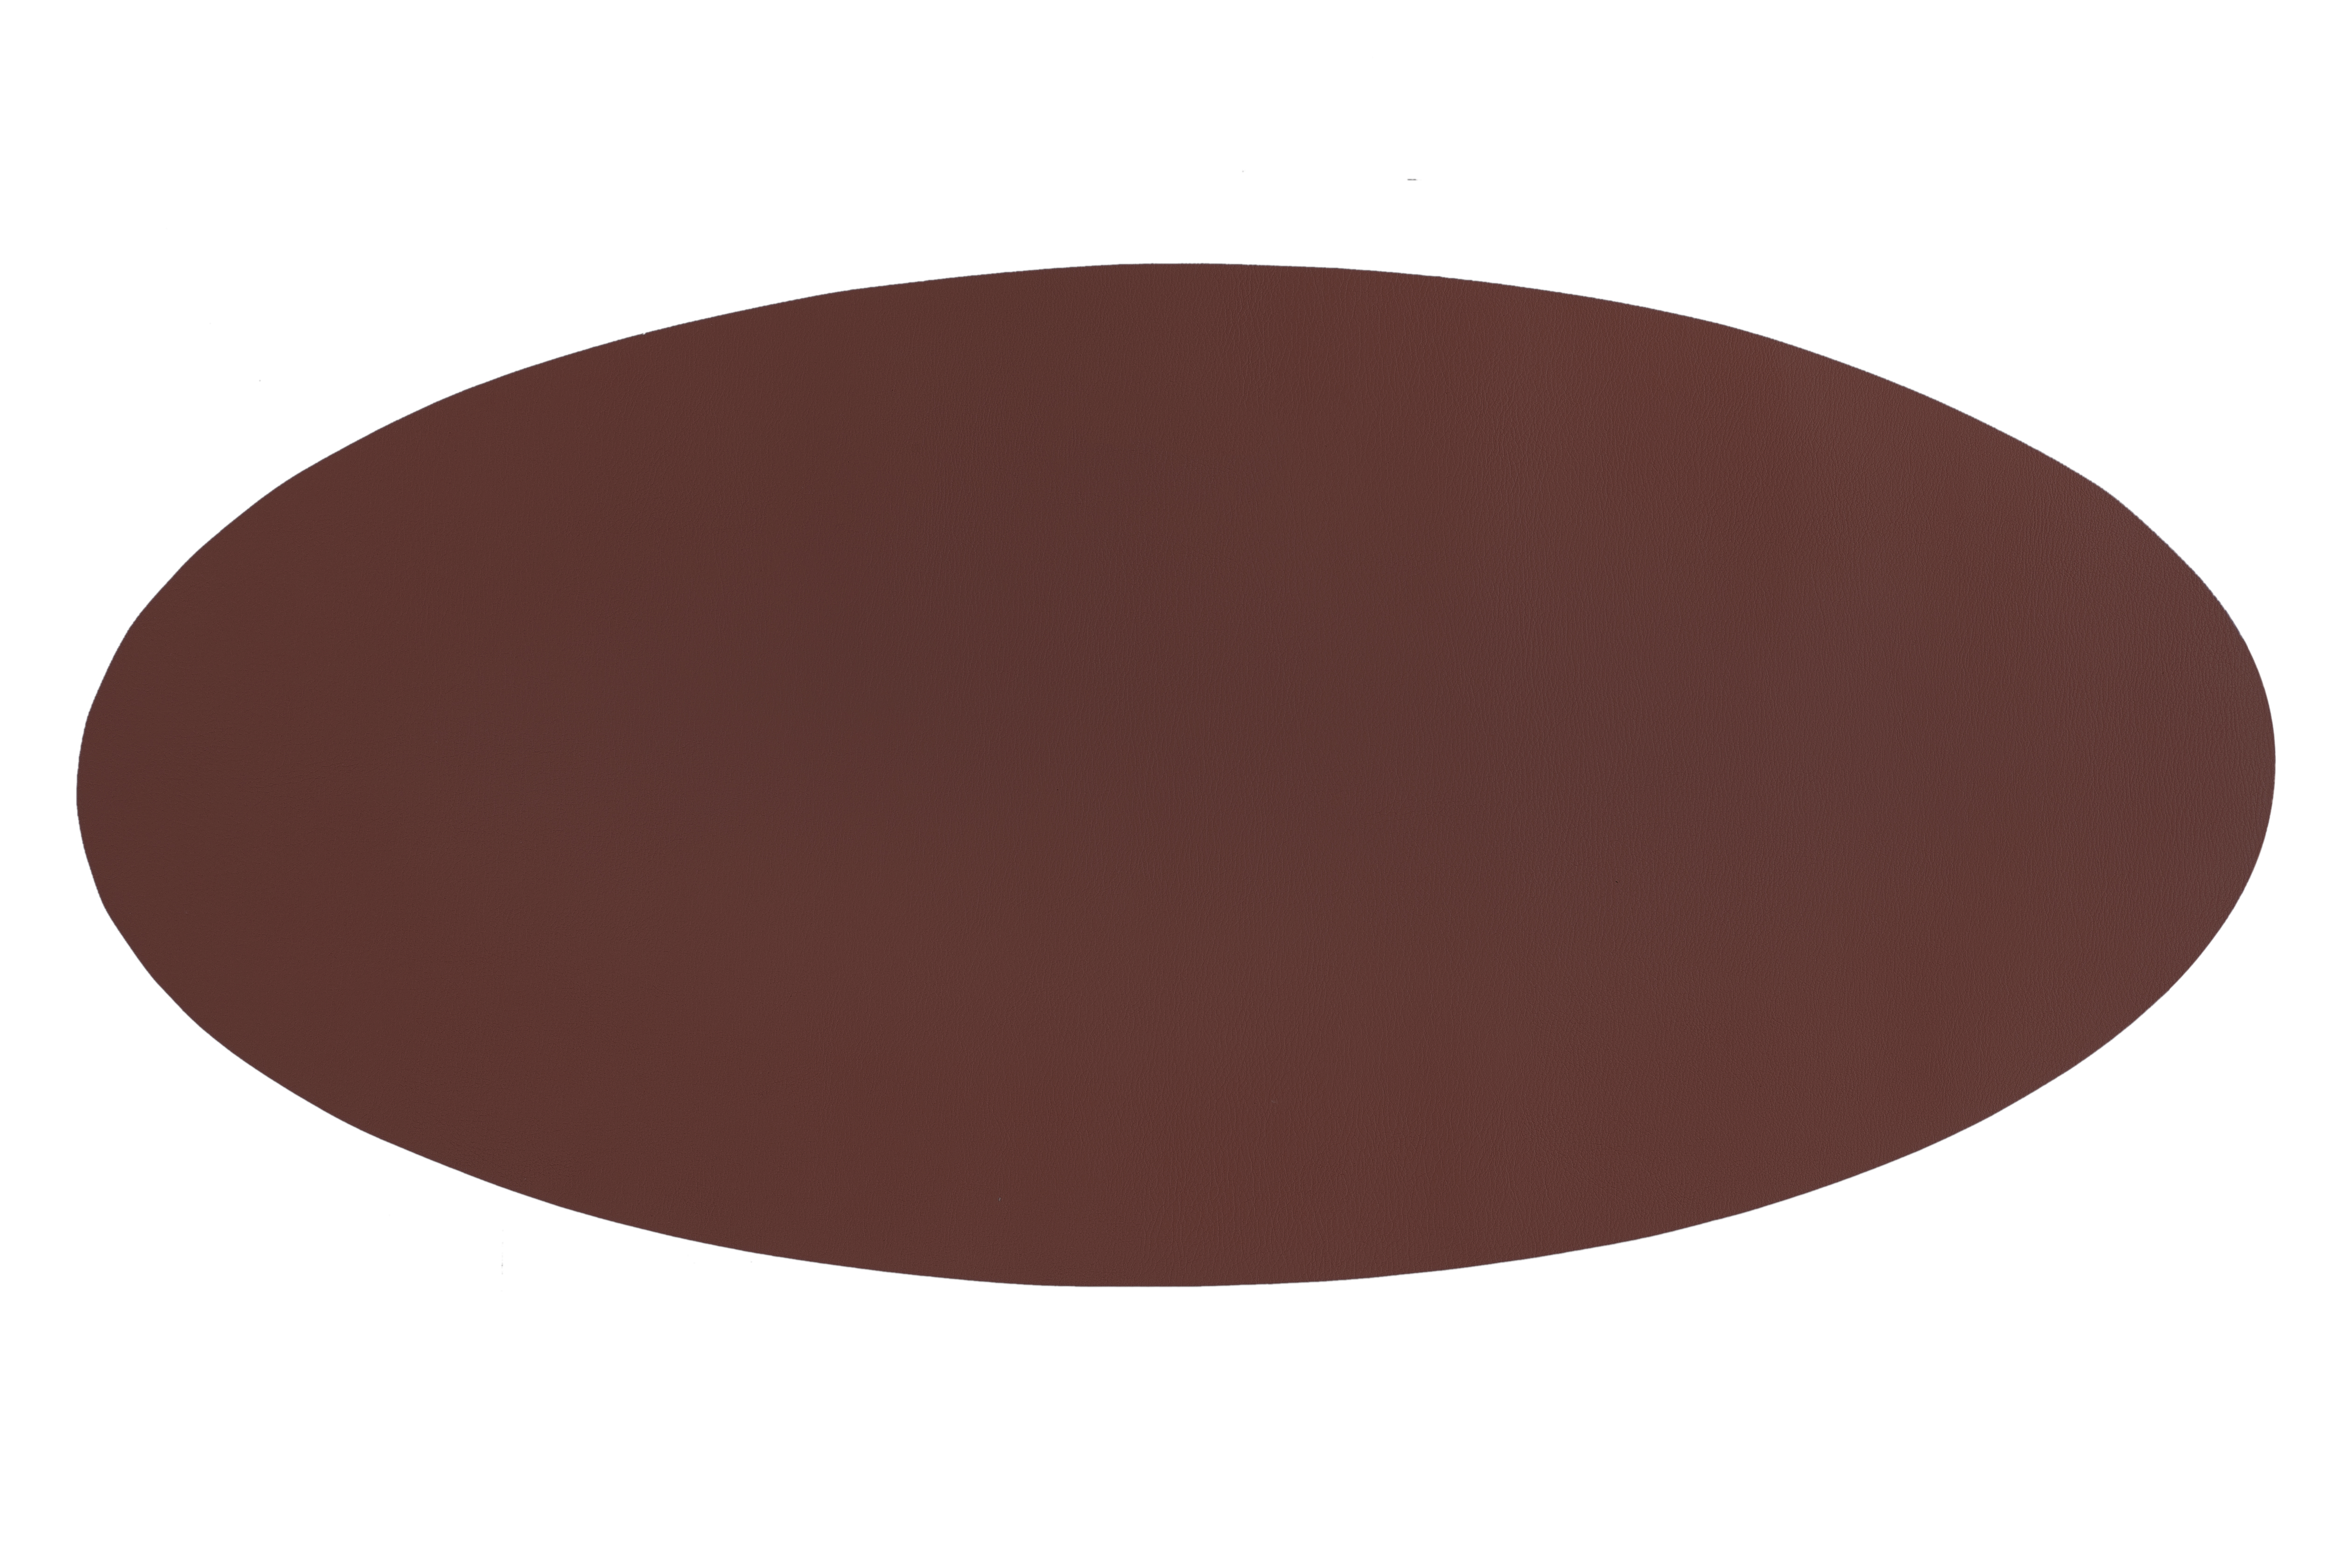 Centerpiece mat oval -Leather look imitation  33X70cm, red